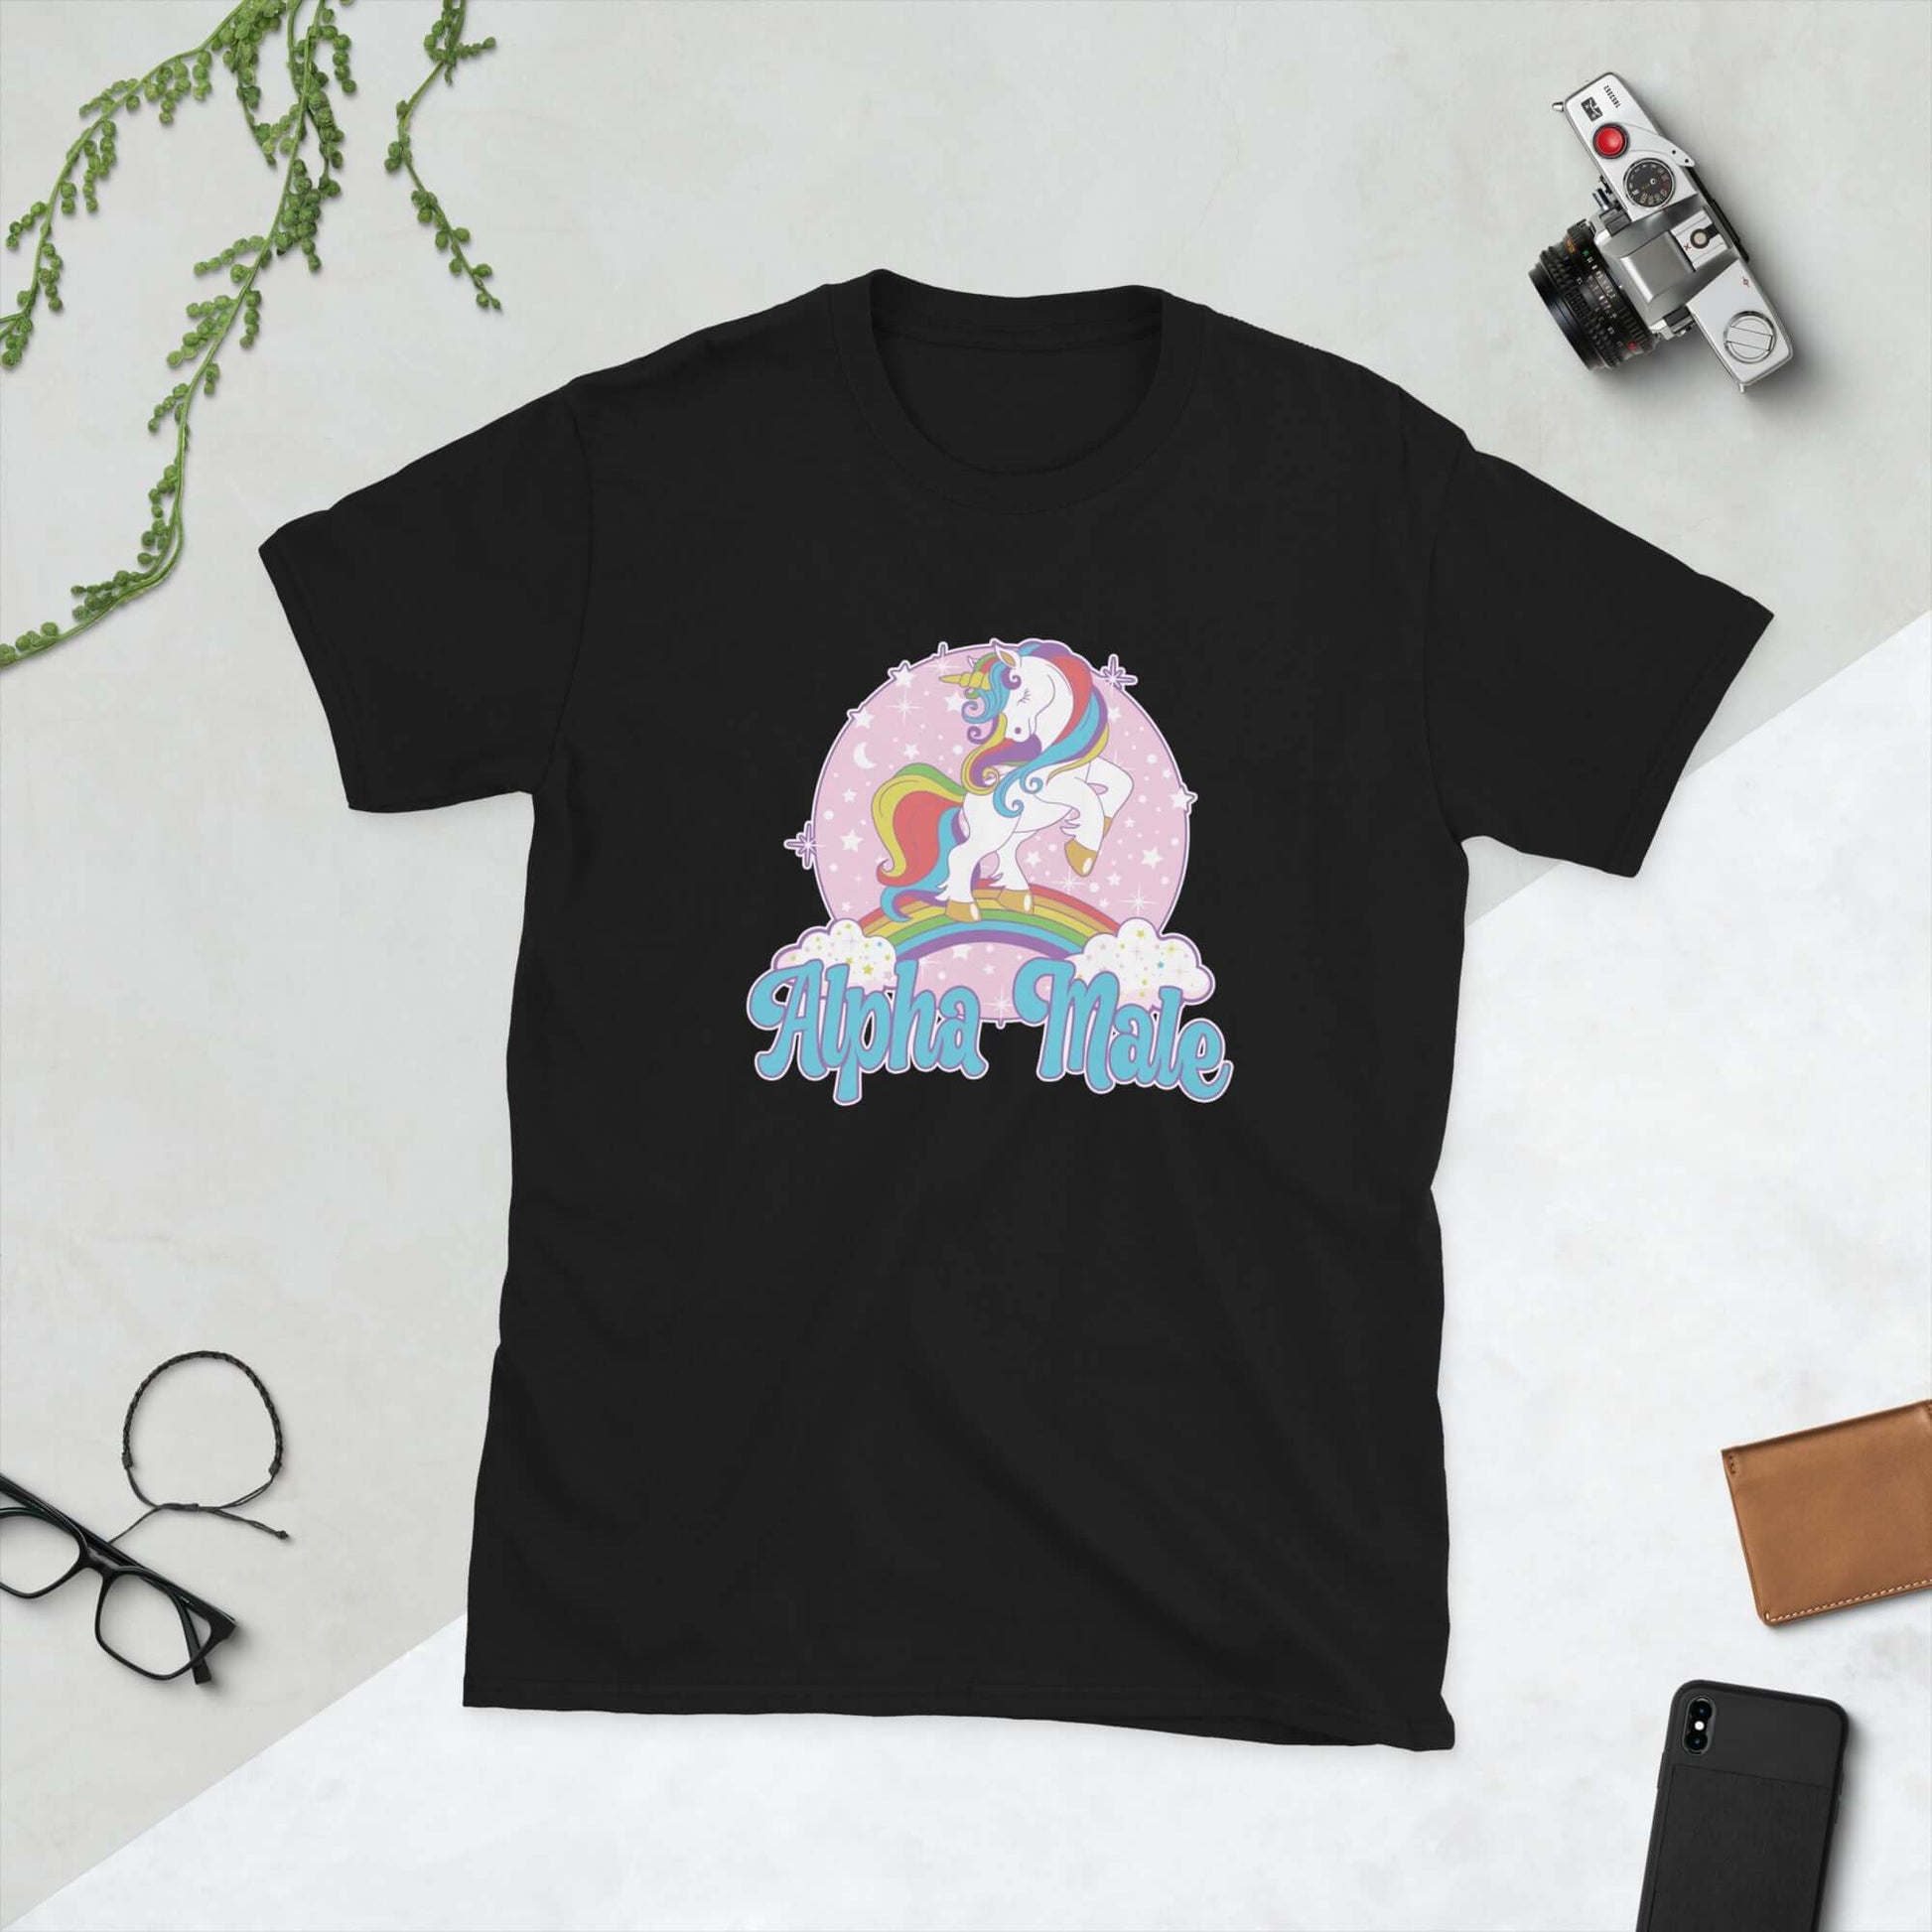 black t-tshirt that says Alpha Male with unicorn graphics